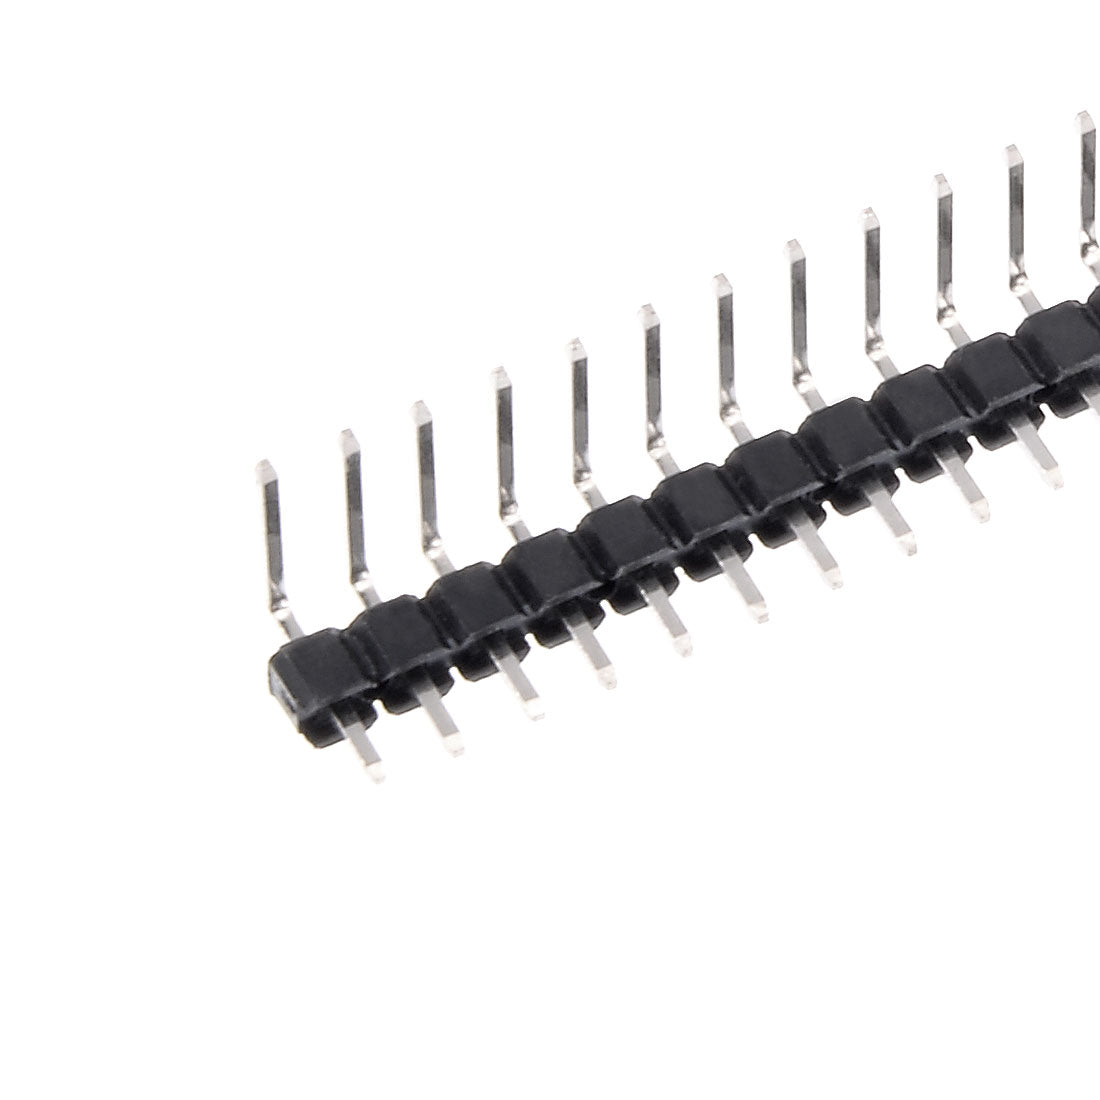 uxcell Uxcell 5Pcs 2.54mm Pitch 40P Single Row Curved Connector Pin Header Strip for Arduino Prototype Shield